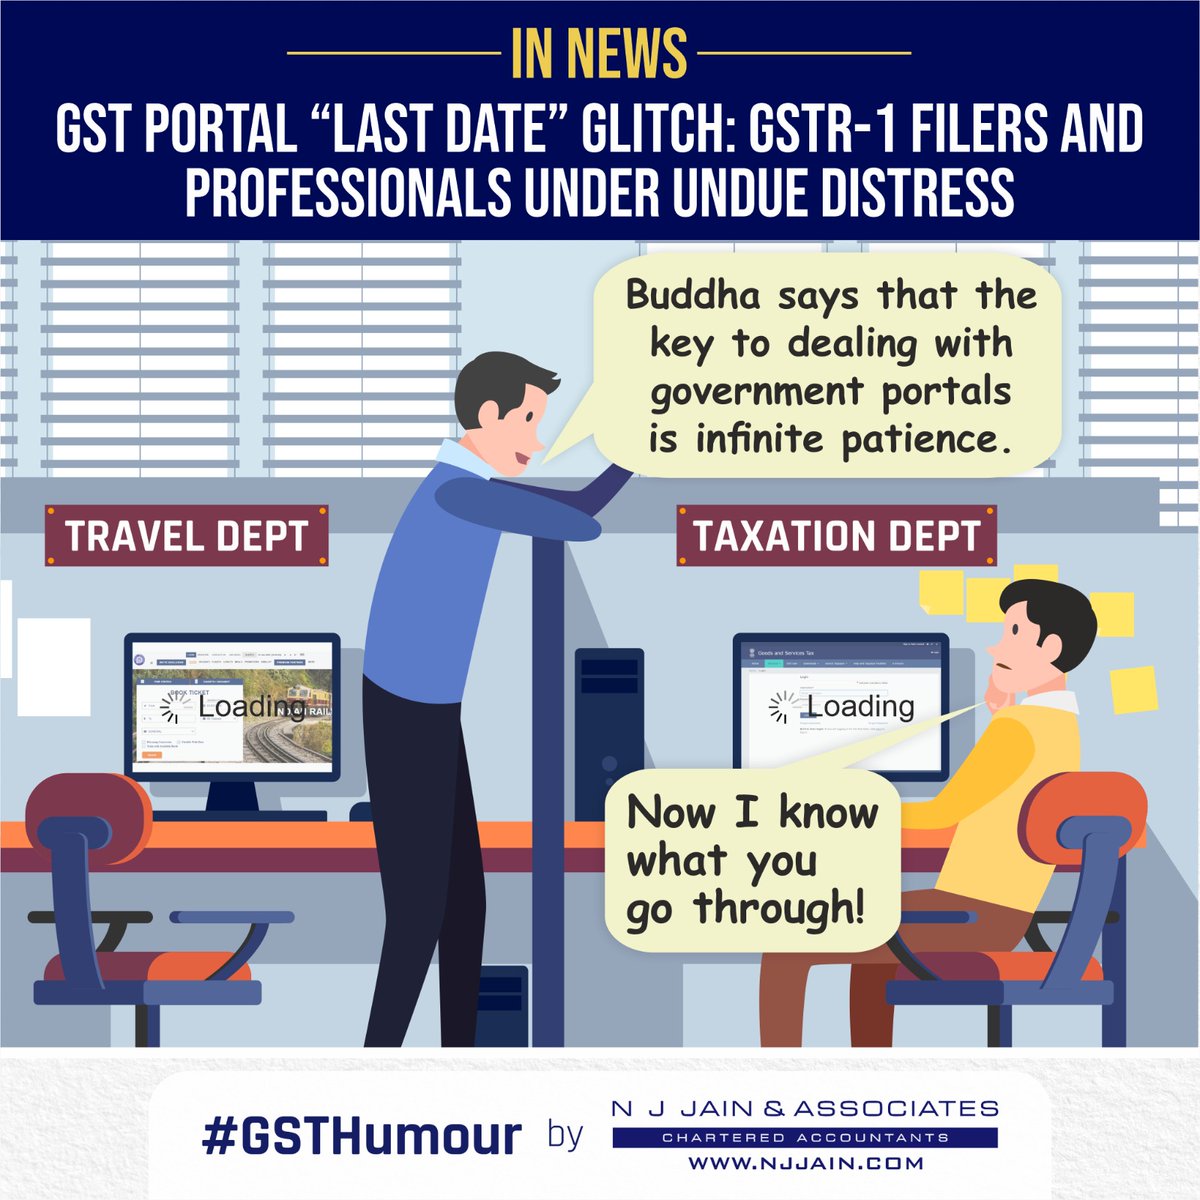 Trying to open the GST Portal seems to be now more complicated than booking a ticket on IRCTC. #GSTPortal #SaturdayVibes #GSTHumour